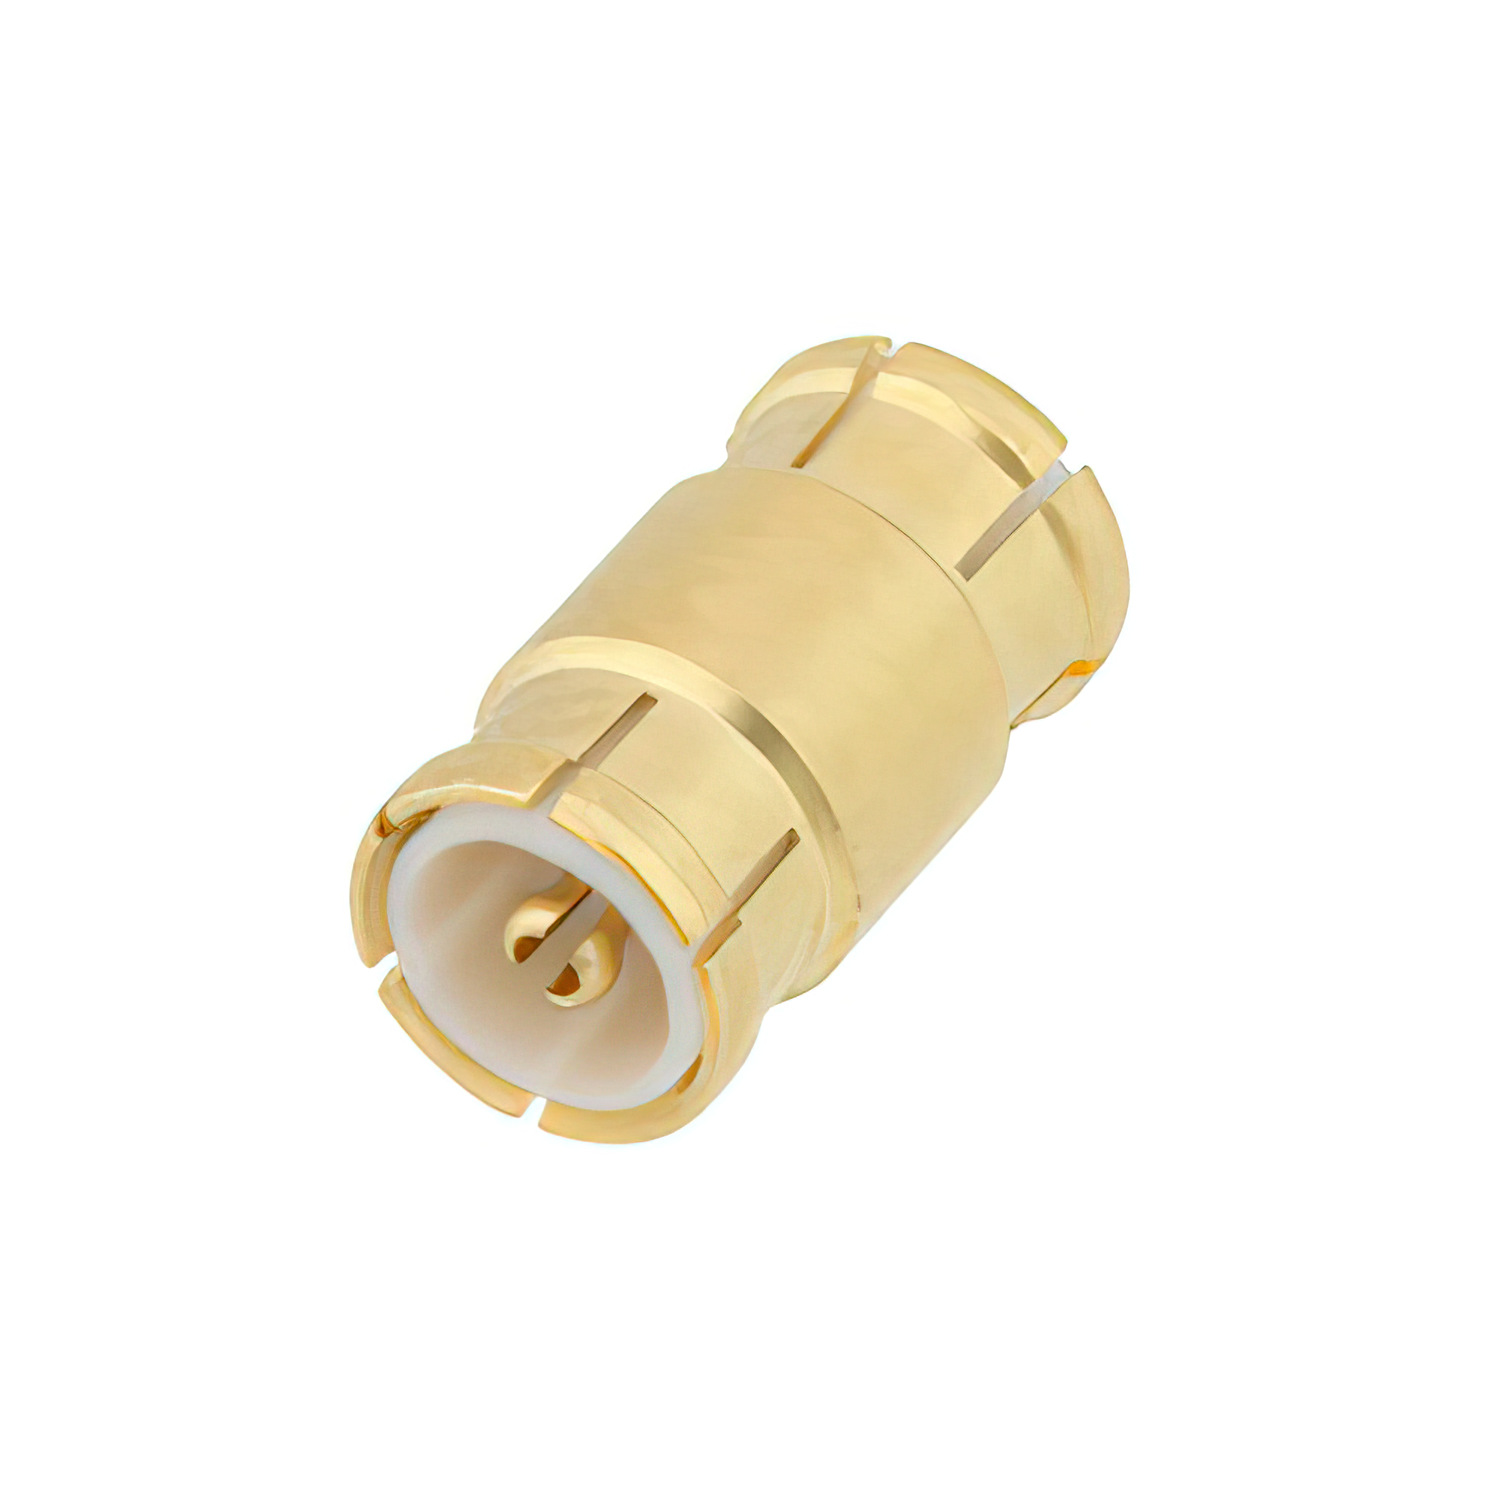 Slide-In MMBX Plug to MMBX Plug Snap Adapter 2